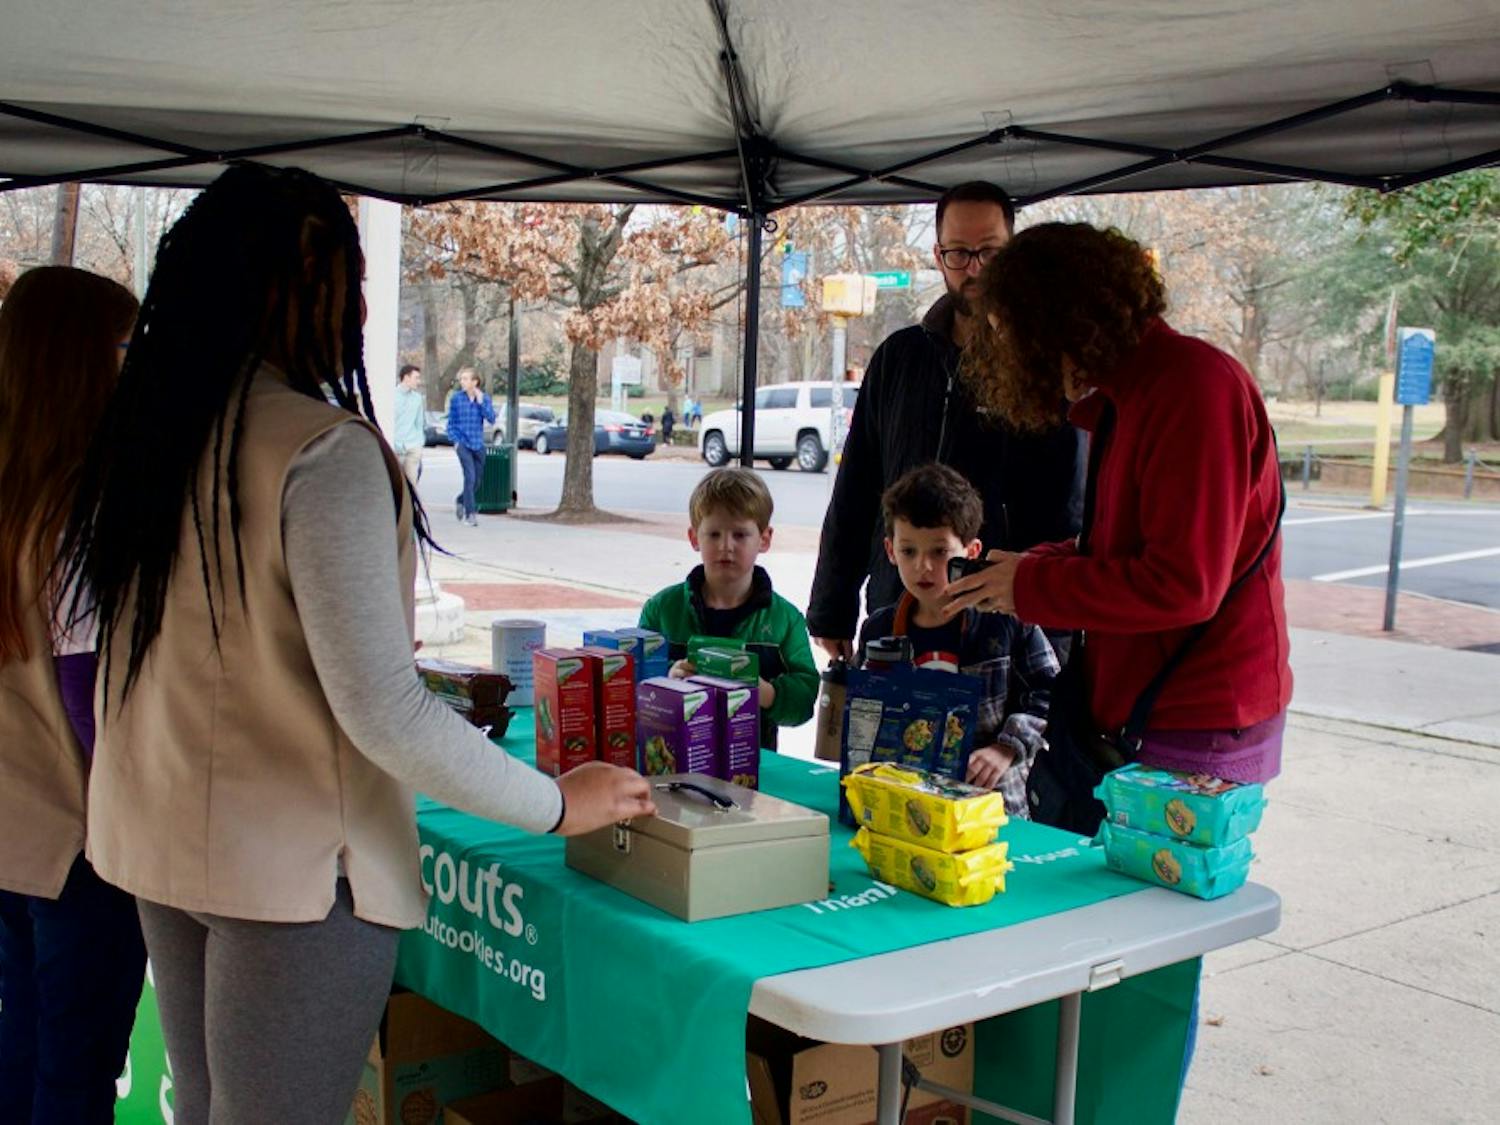 Girl Scouts selling cookies in front of the United States Post Office on Franklin Street on Saturday, Jan. 19, 2019. They said this location is a great spot that many Girl Scouts prefer to sell cookies at since they are able to make a lot more sells.